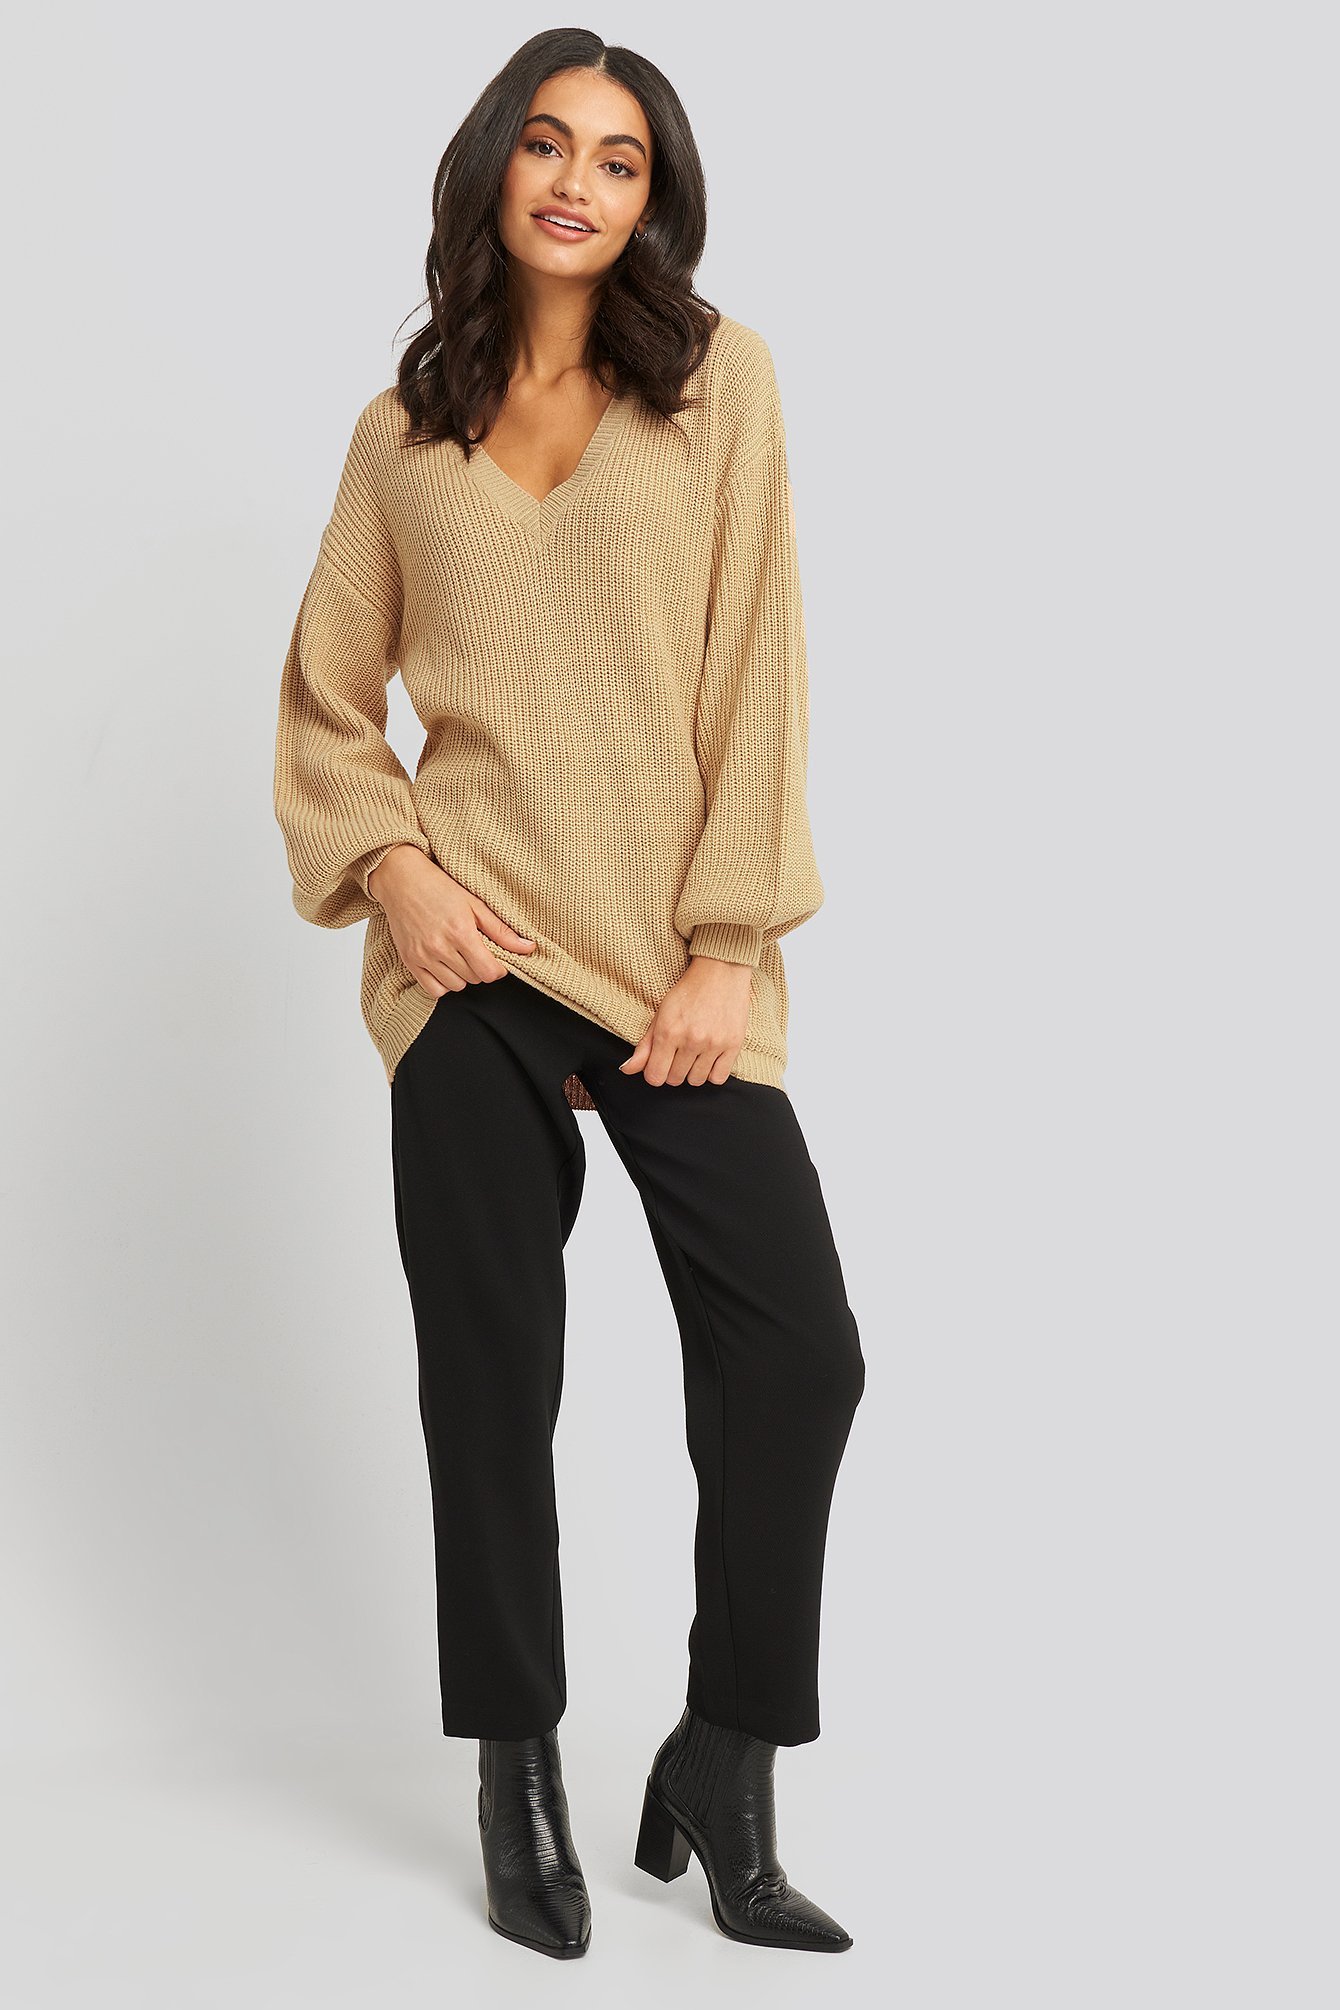 Deep V Front Long Knitted Sweater Outfit.